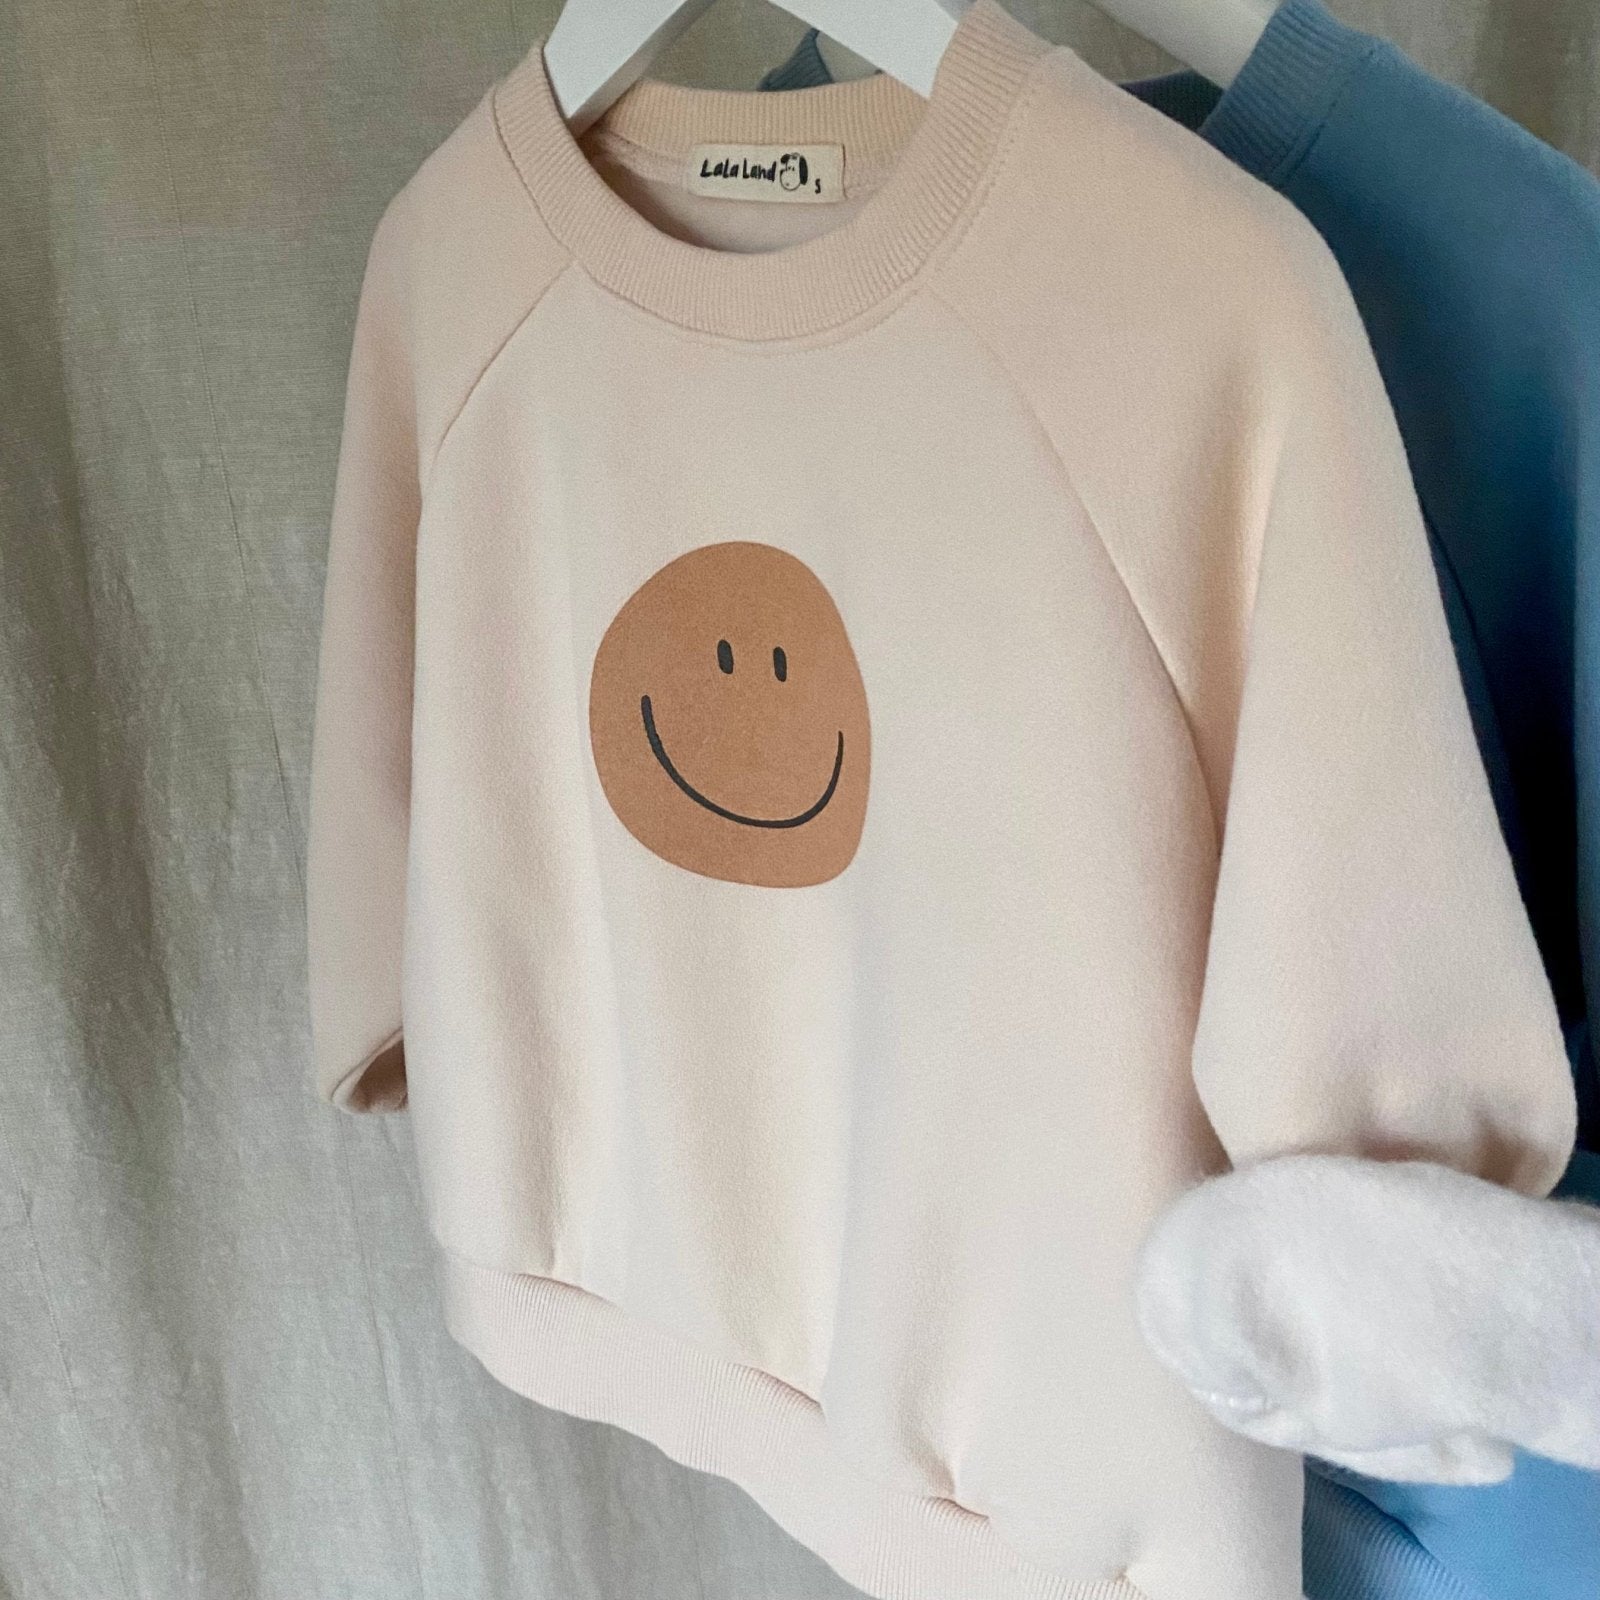 Smile Sweatshirt find Stylish Fashion for Little People- at Little Foxx Concept Store